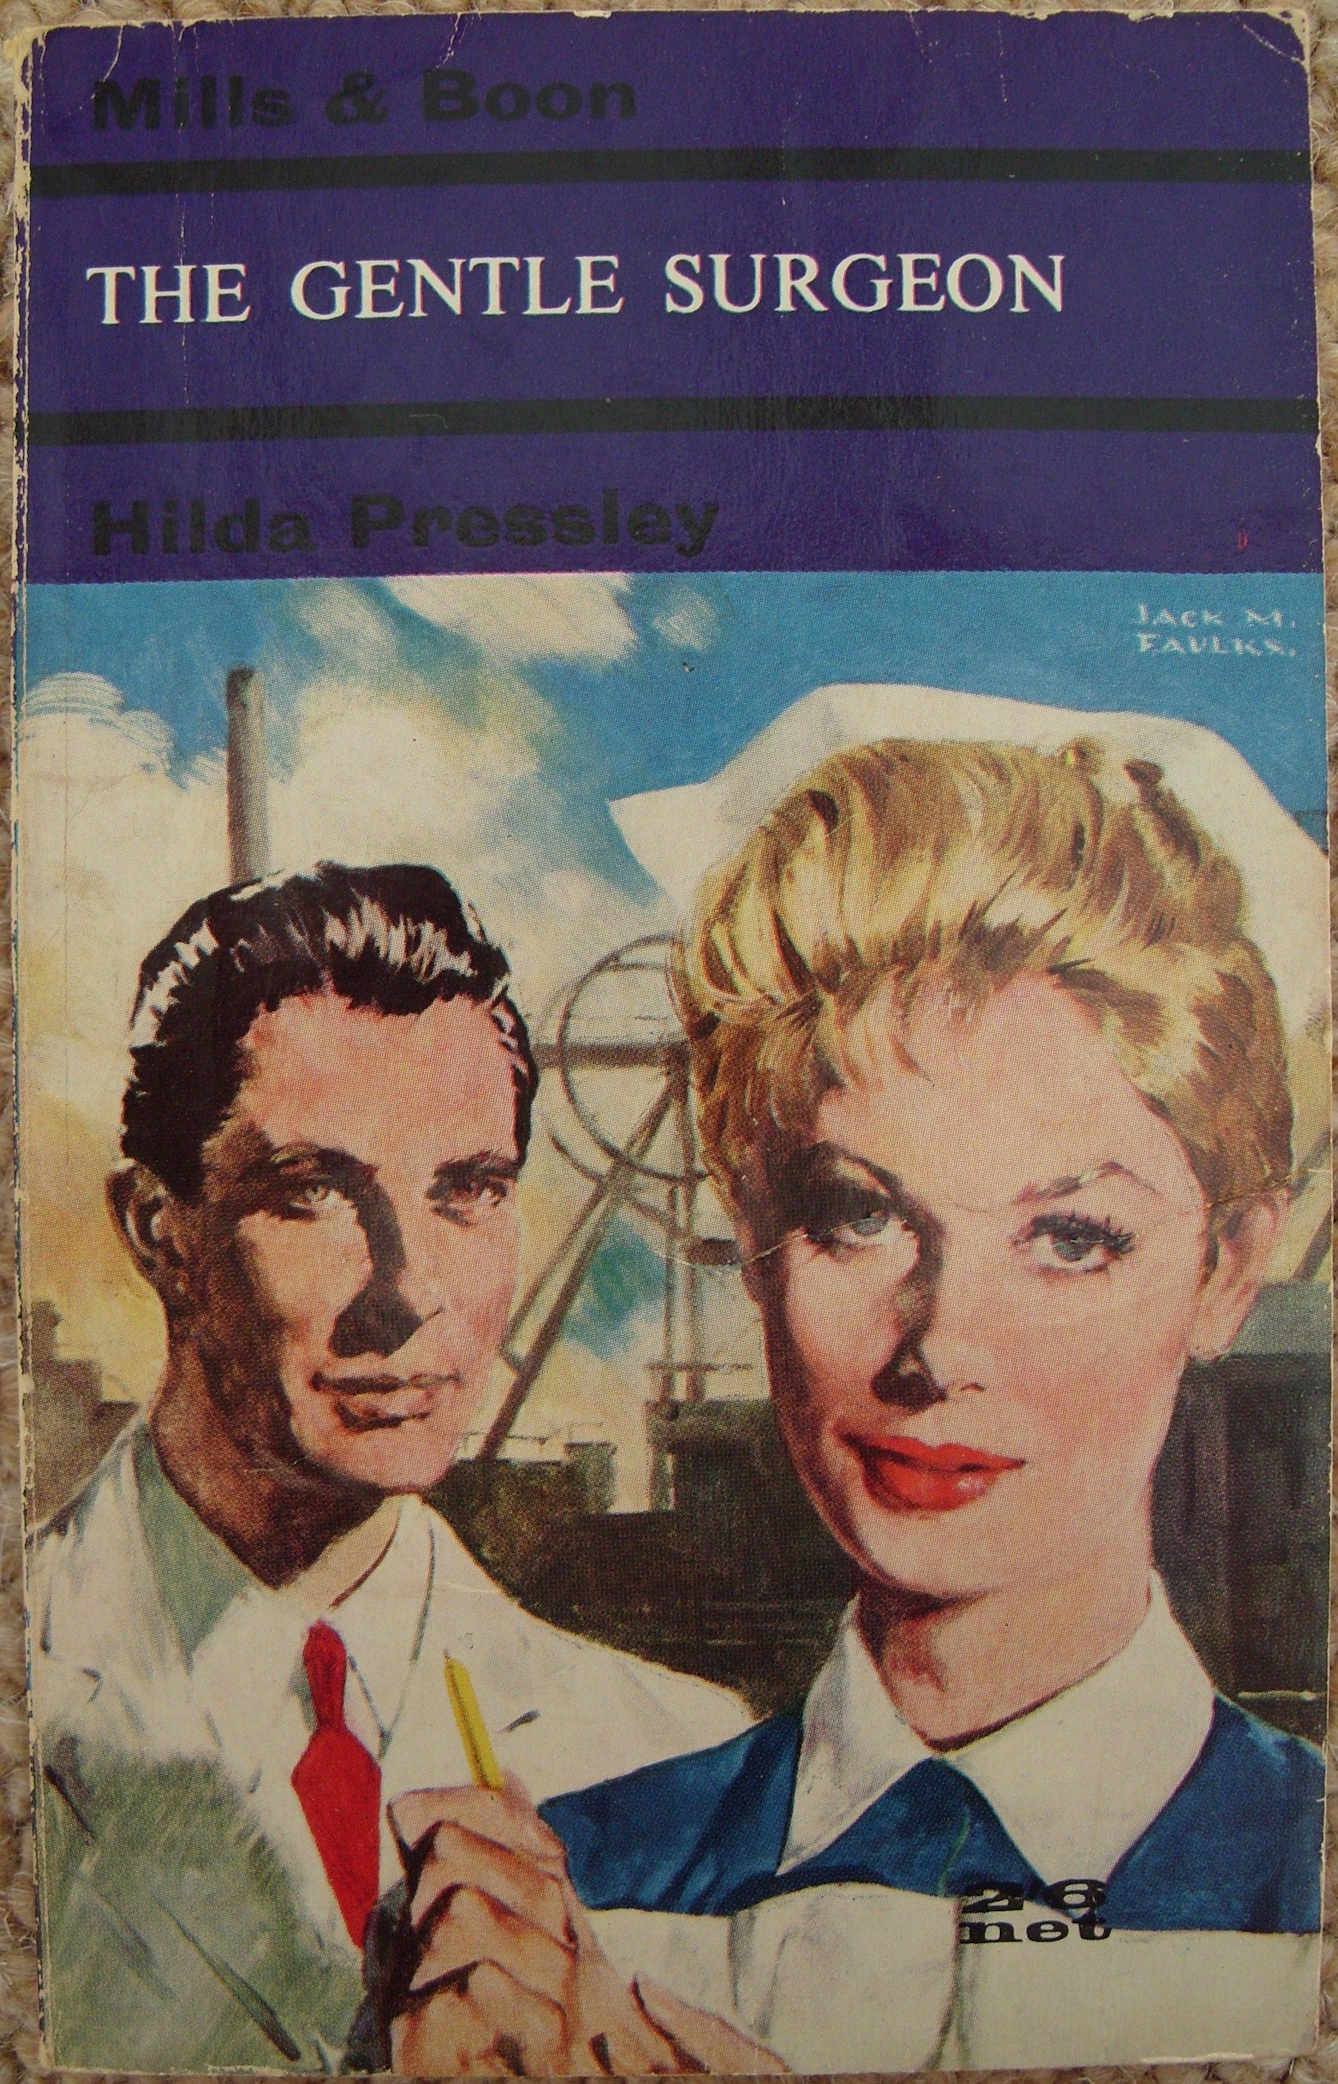 Cover of a Mills & Boon novel: The Gentle Surgeon by Hilda Pressley, with a cover illustration of a female nurse and a male doctor